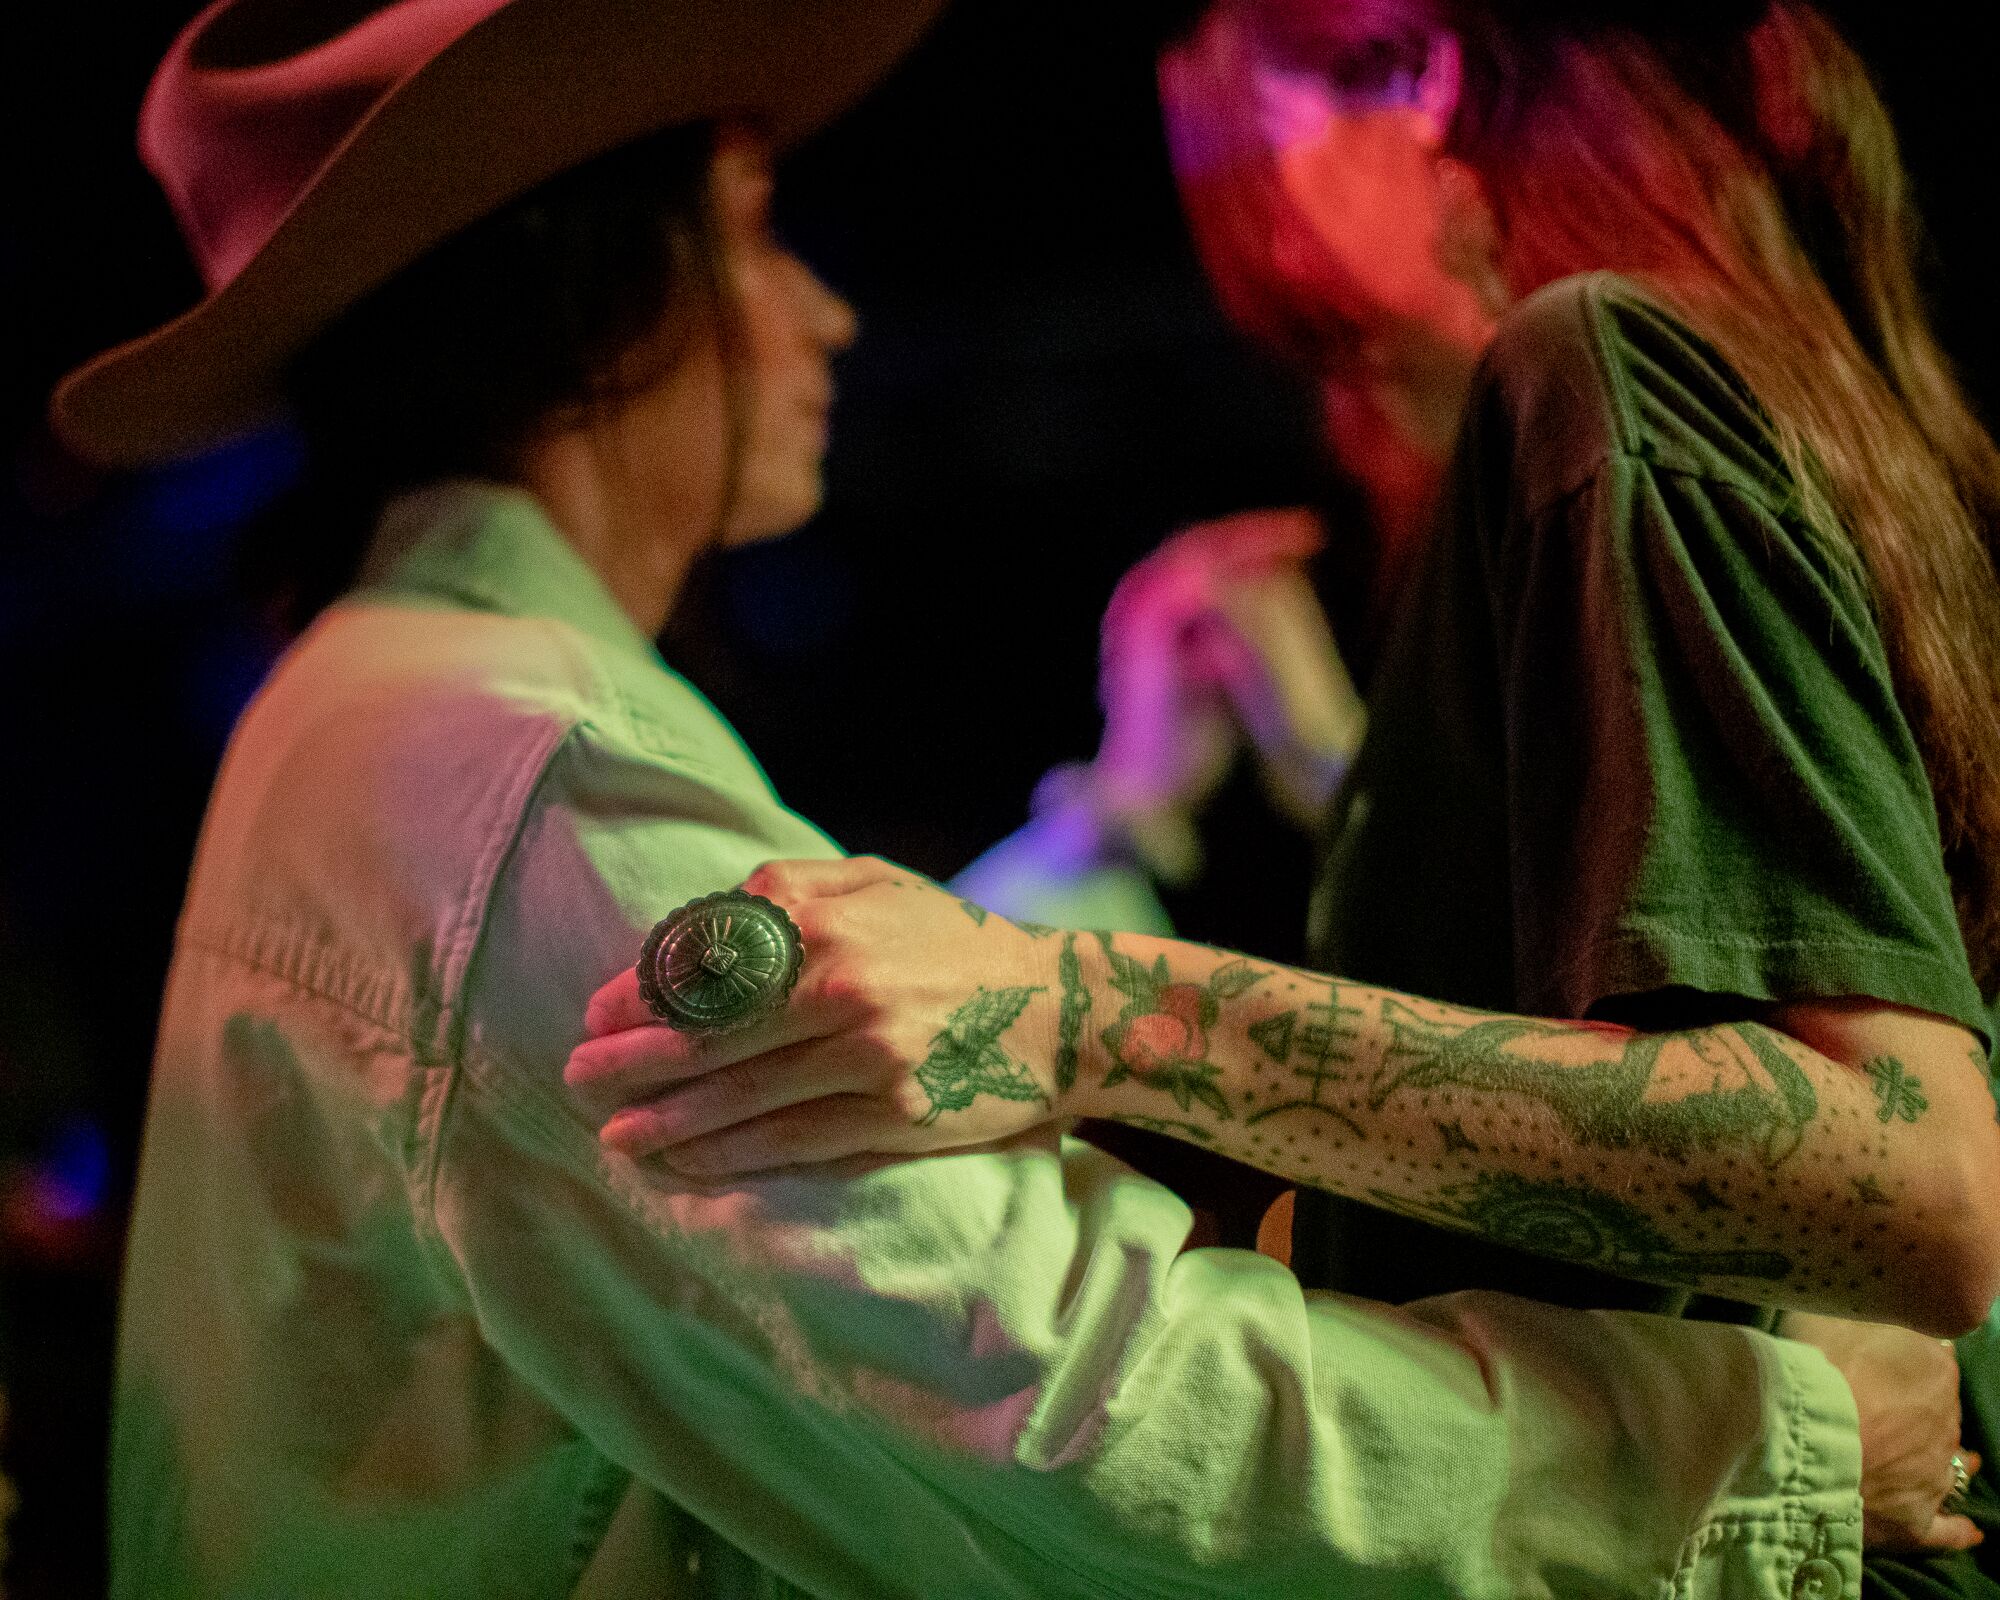 A detail of two people dancing, showing a person's hand adorned with tattoos and a large oval ring.